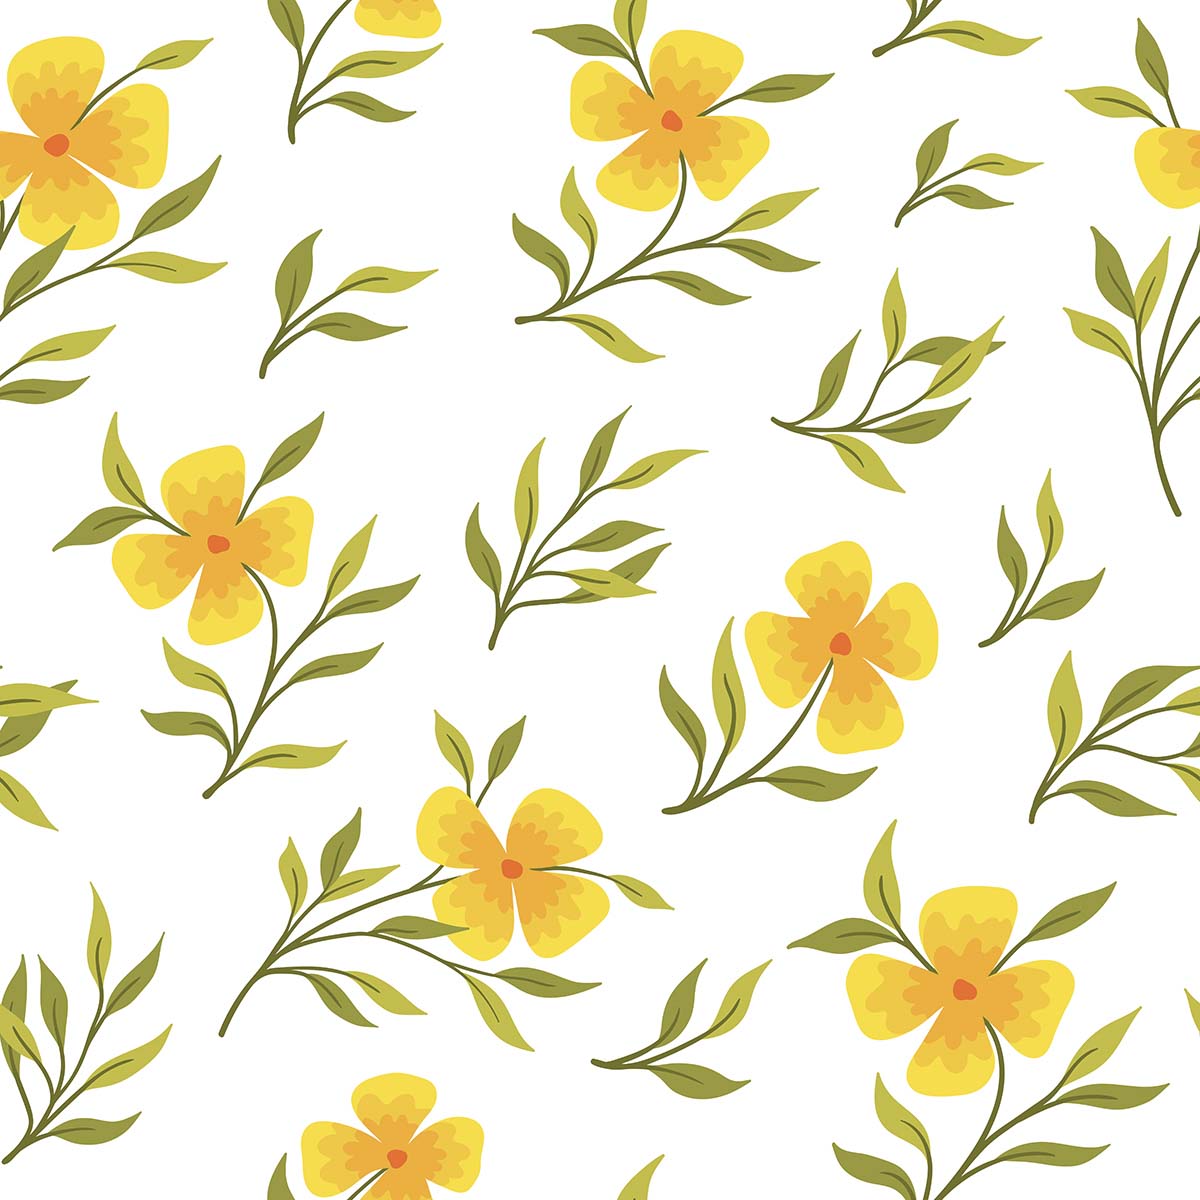 A pattern of yellow flowers and green leaves